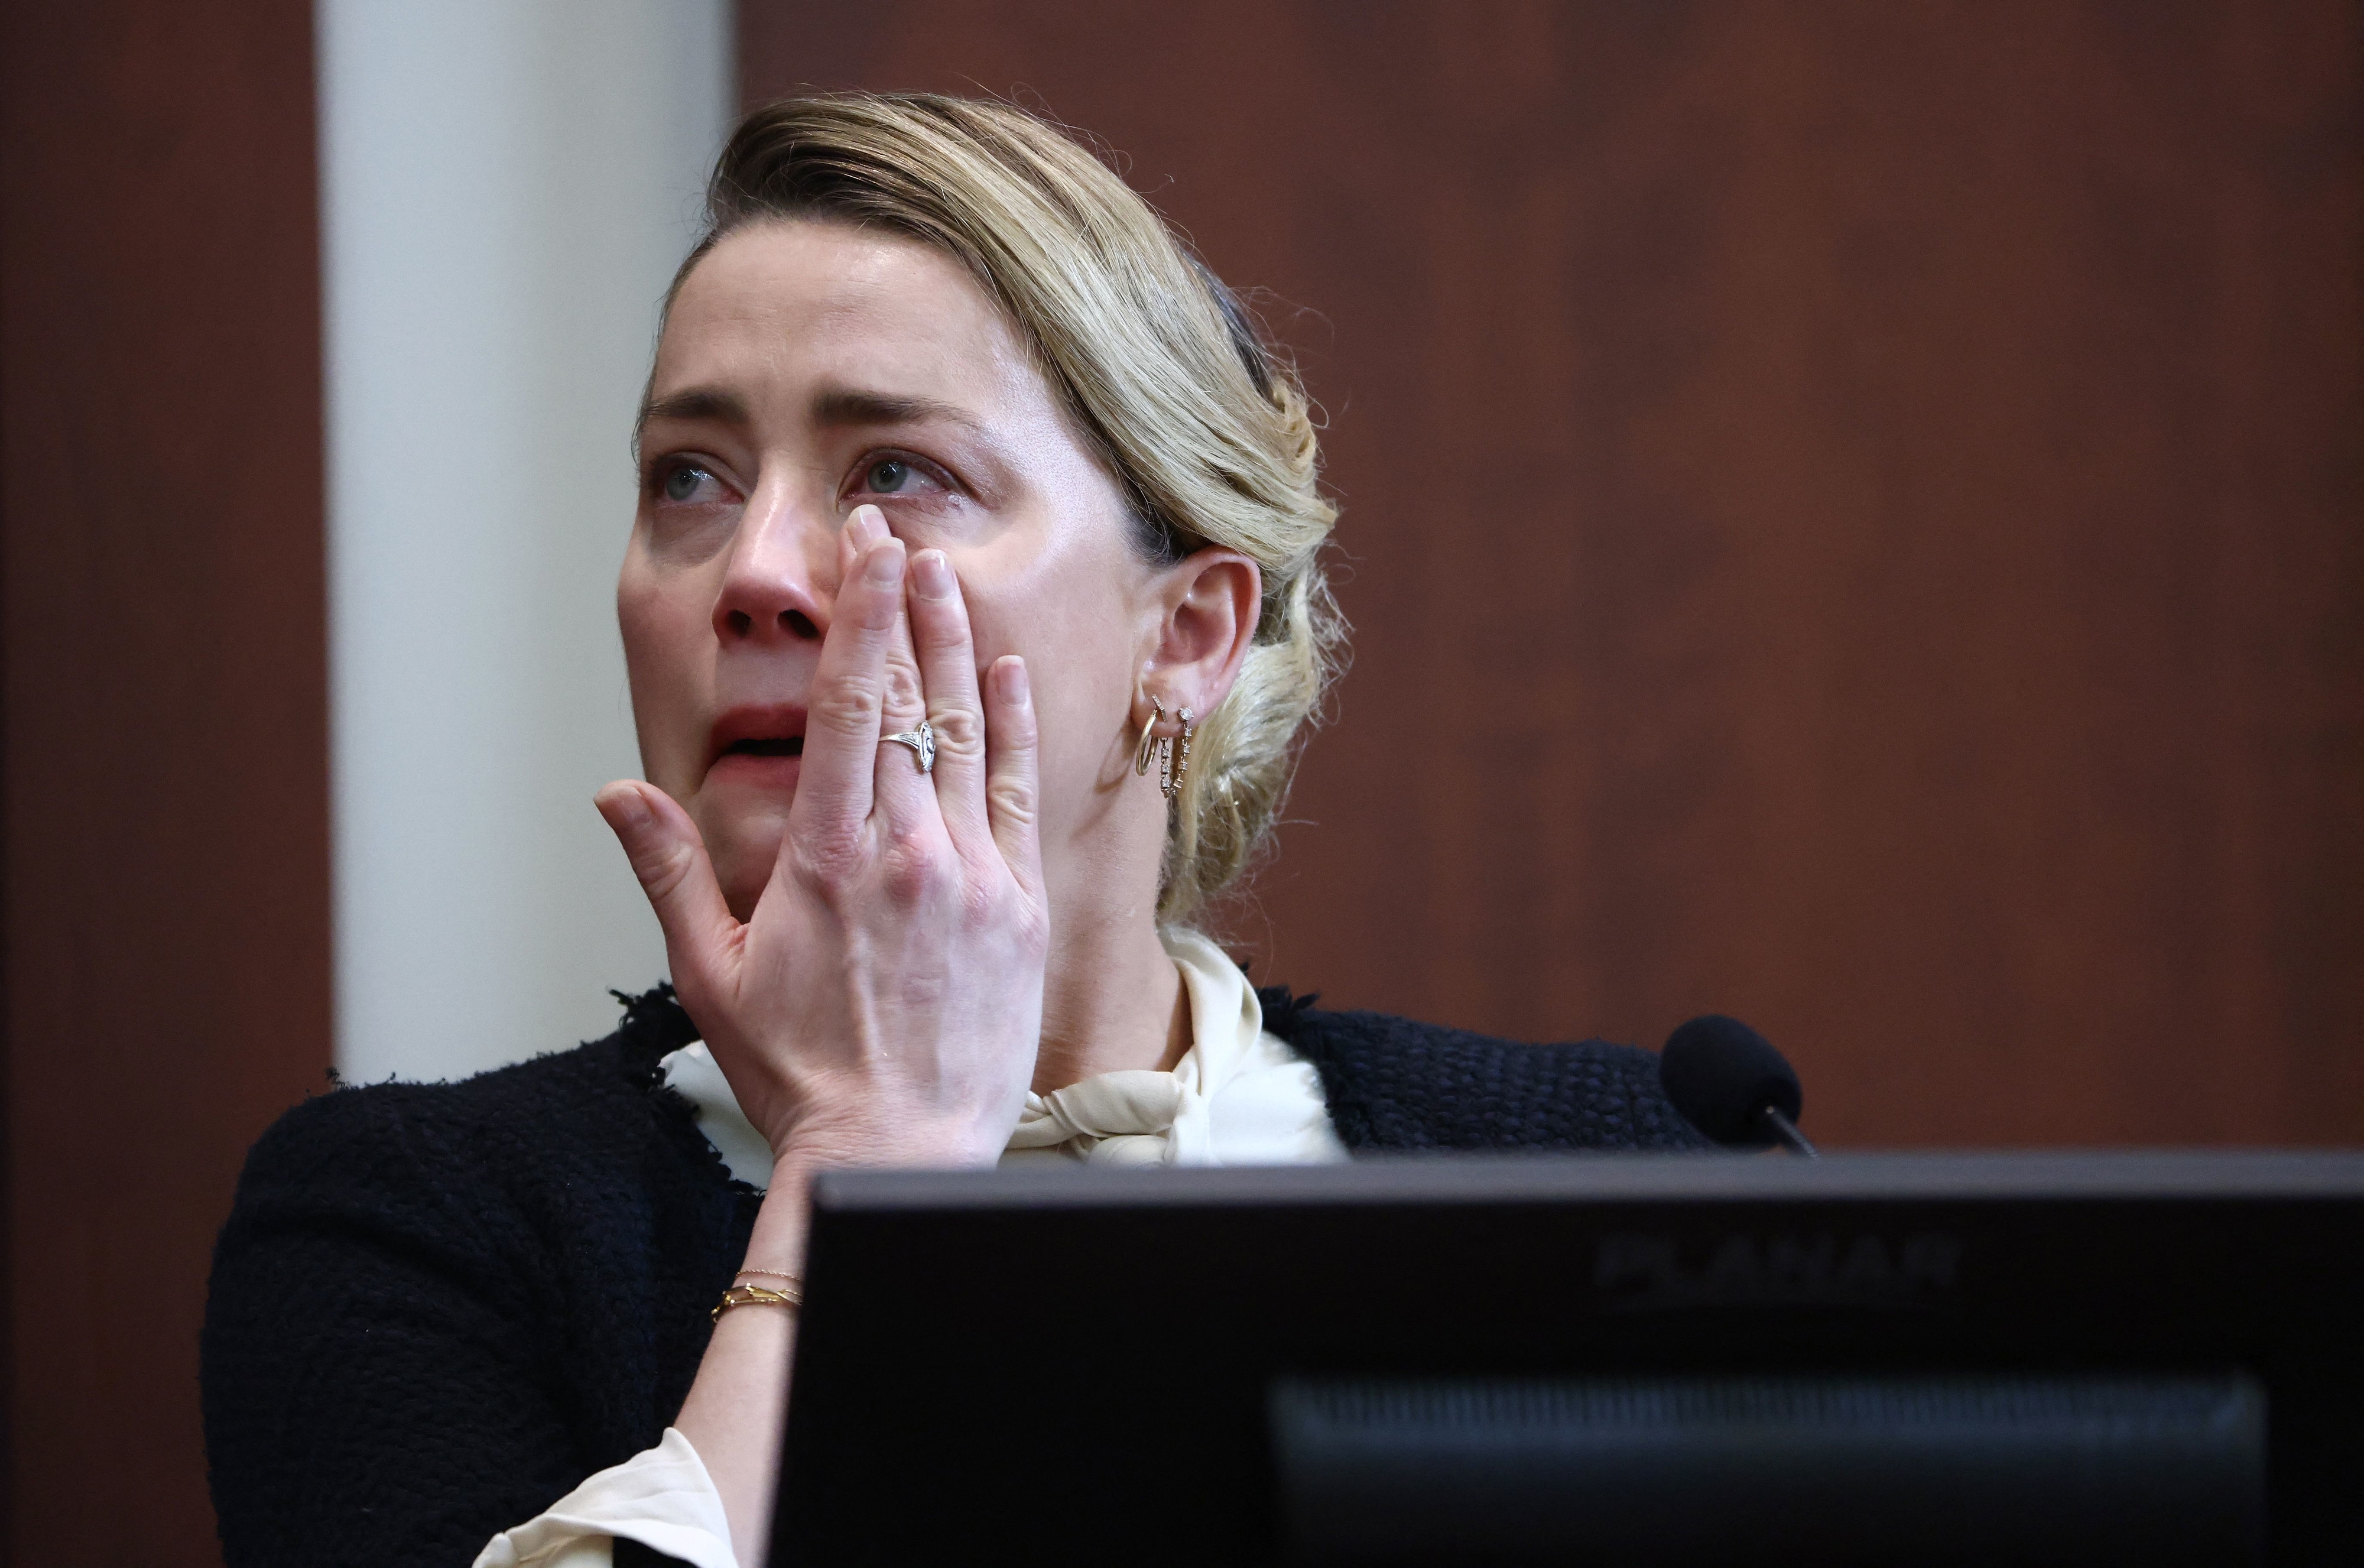 Amber in tears in court